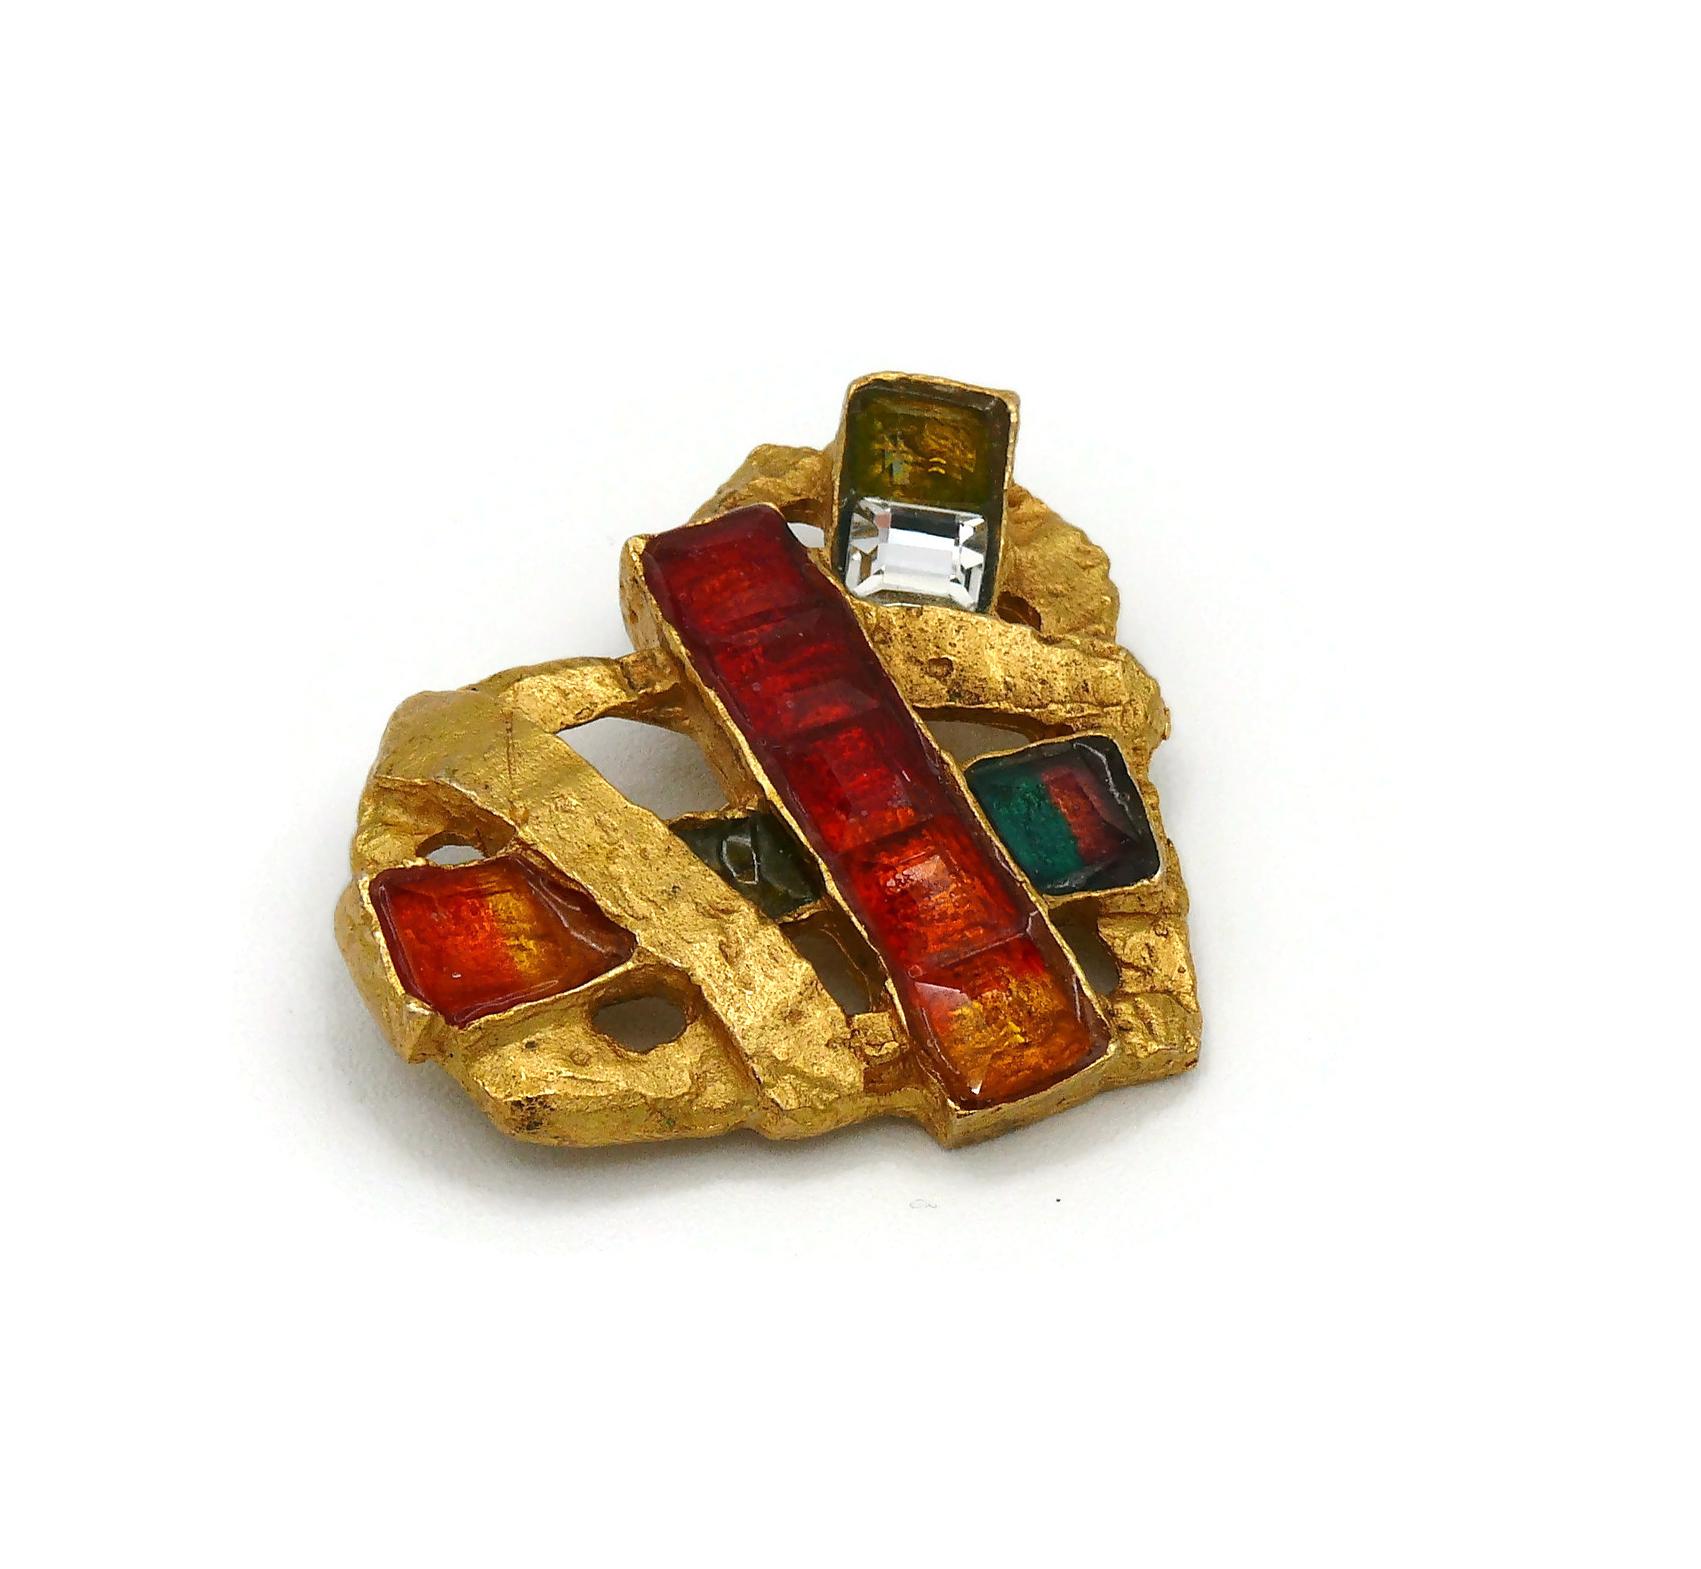 christian lacroix brooch